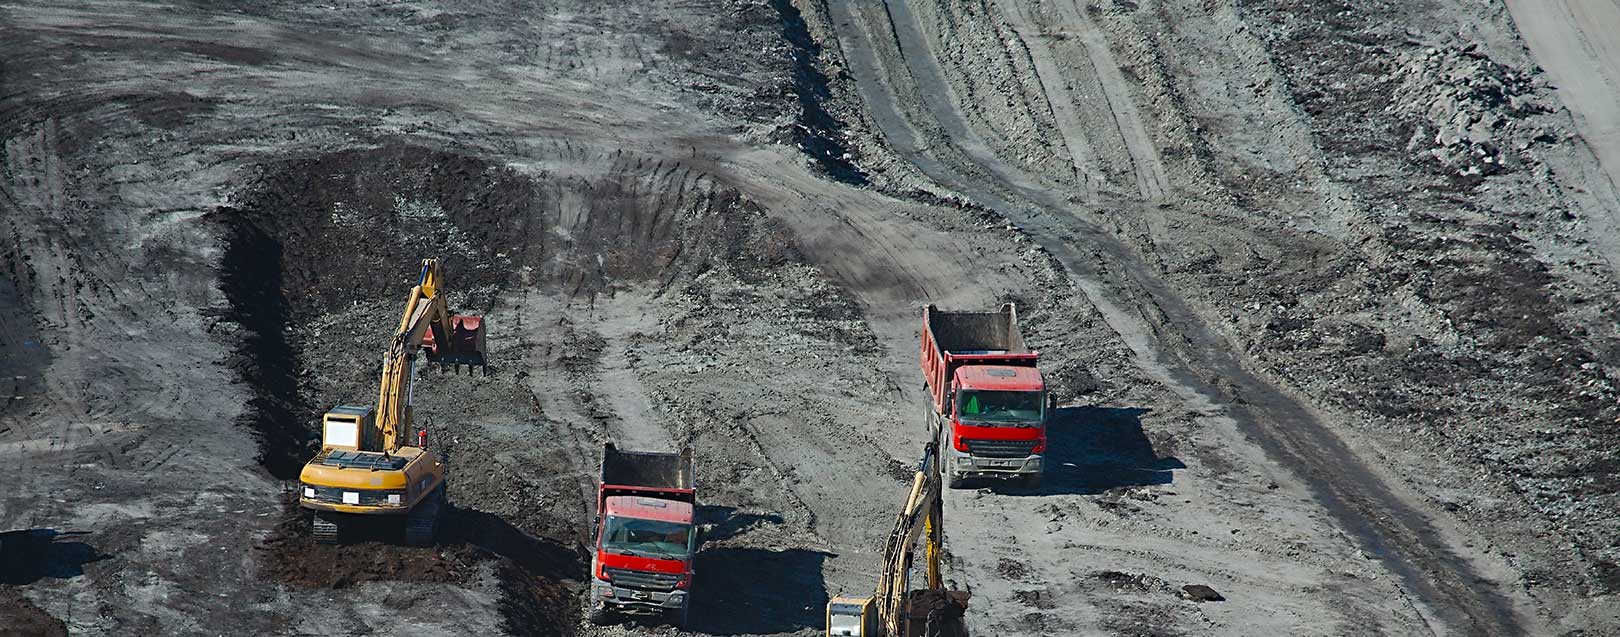 India expresses interest to develop coal fields in Russia